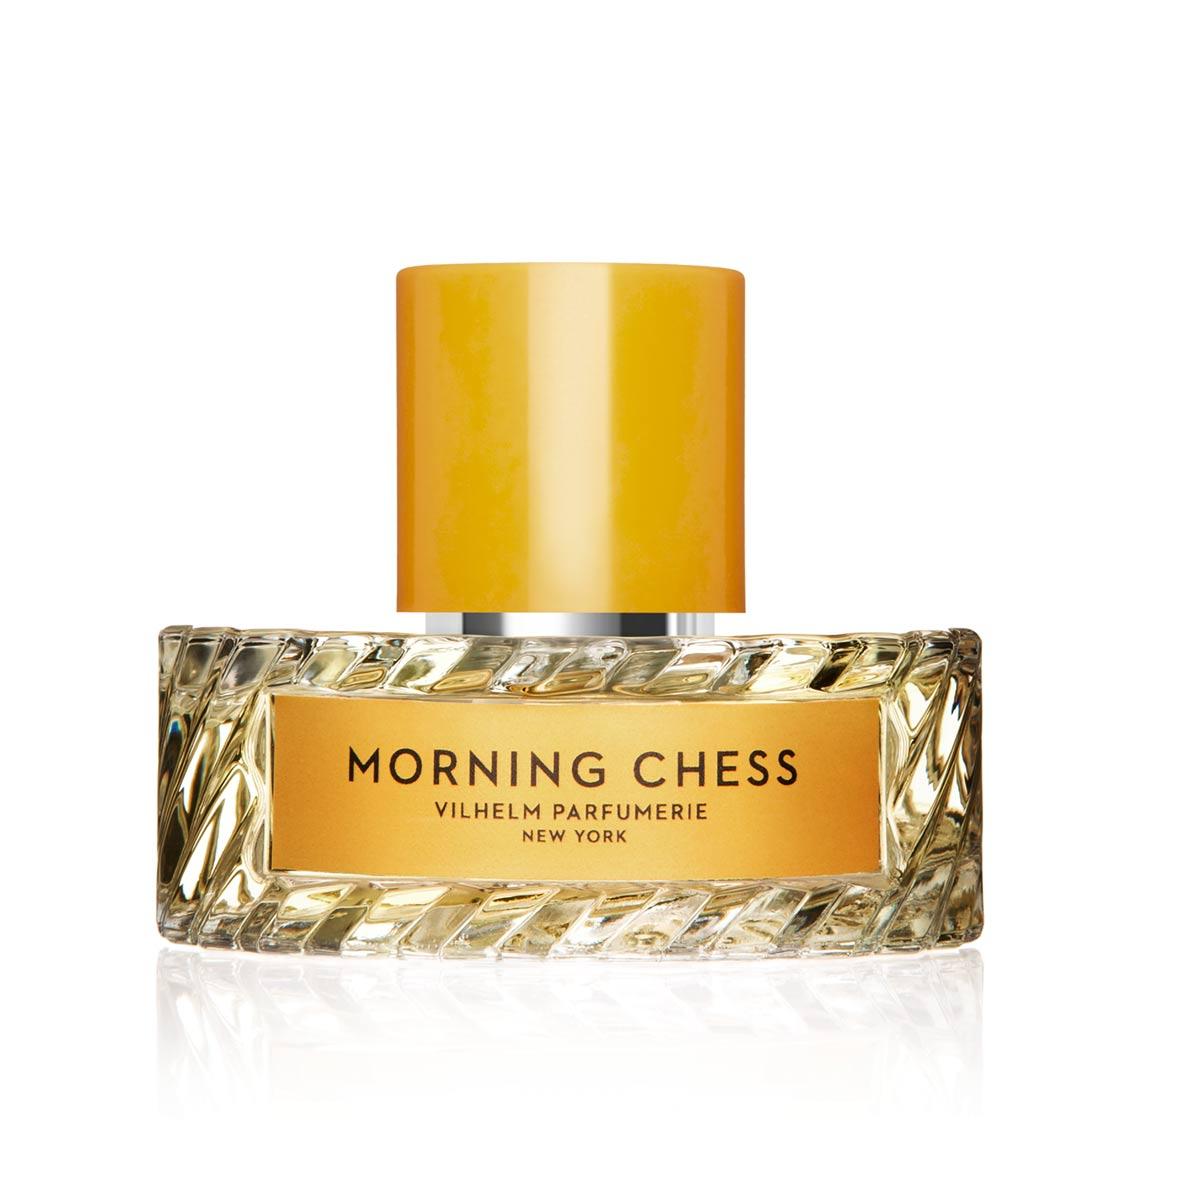 Primary image of Morning Chess EDP